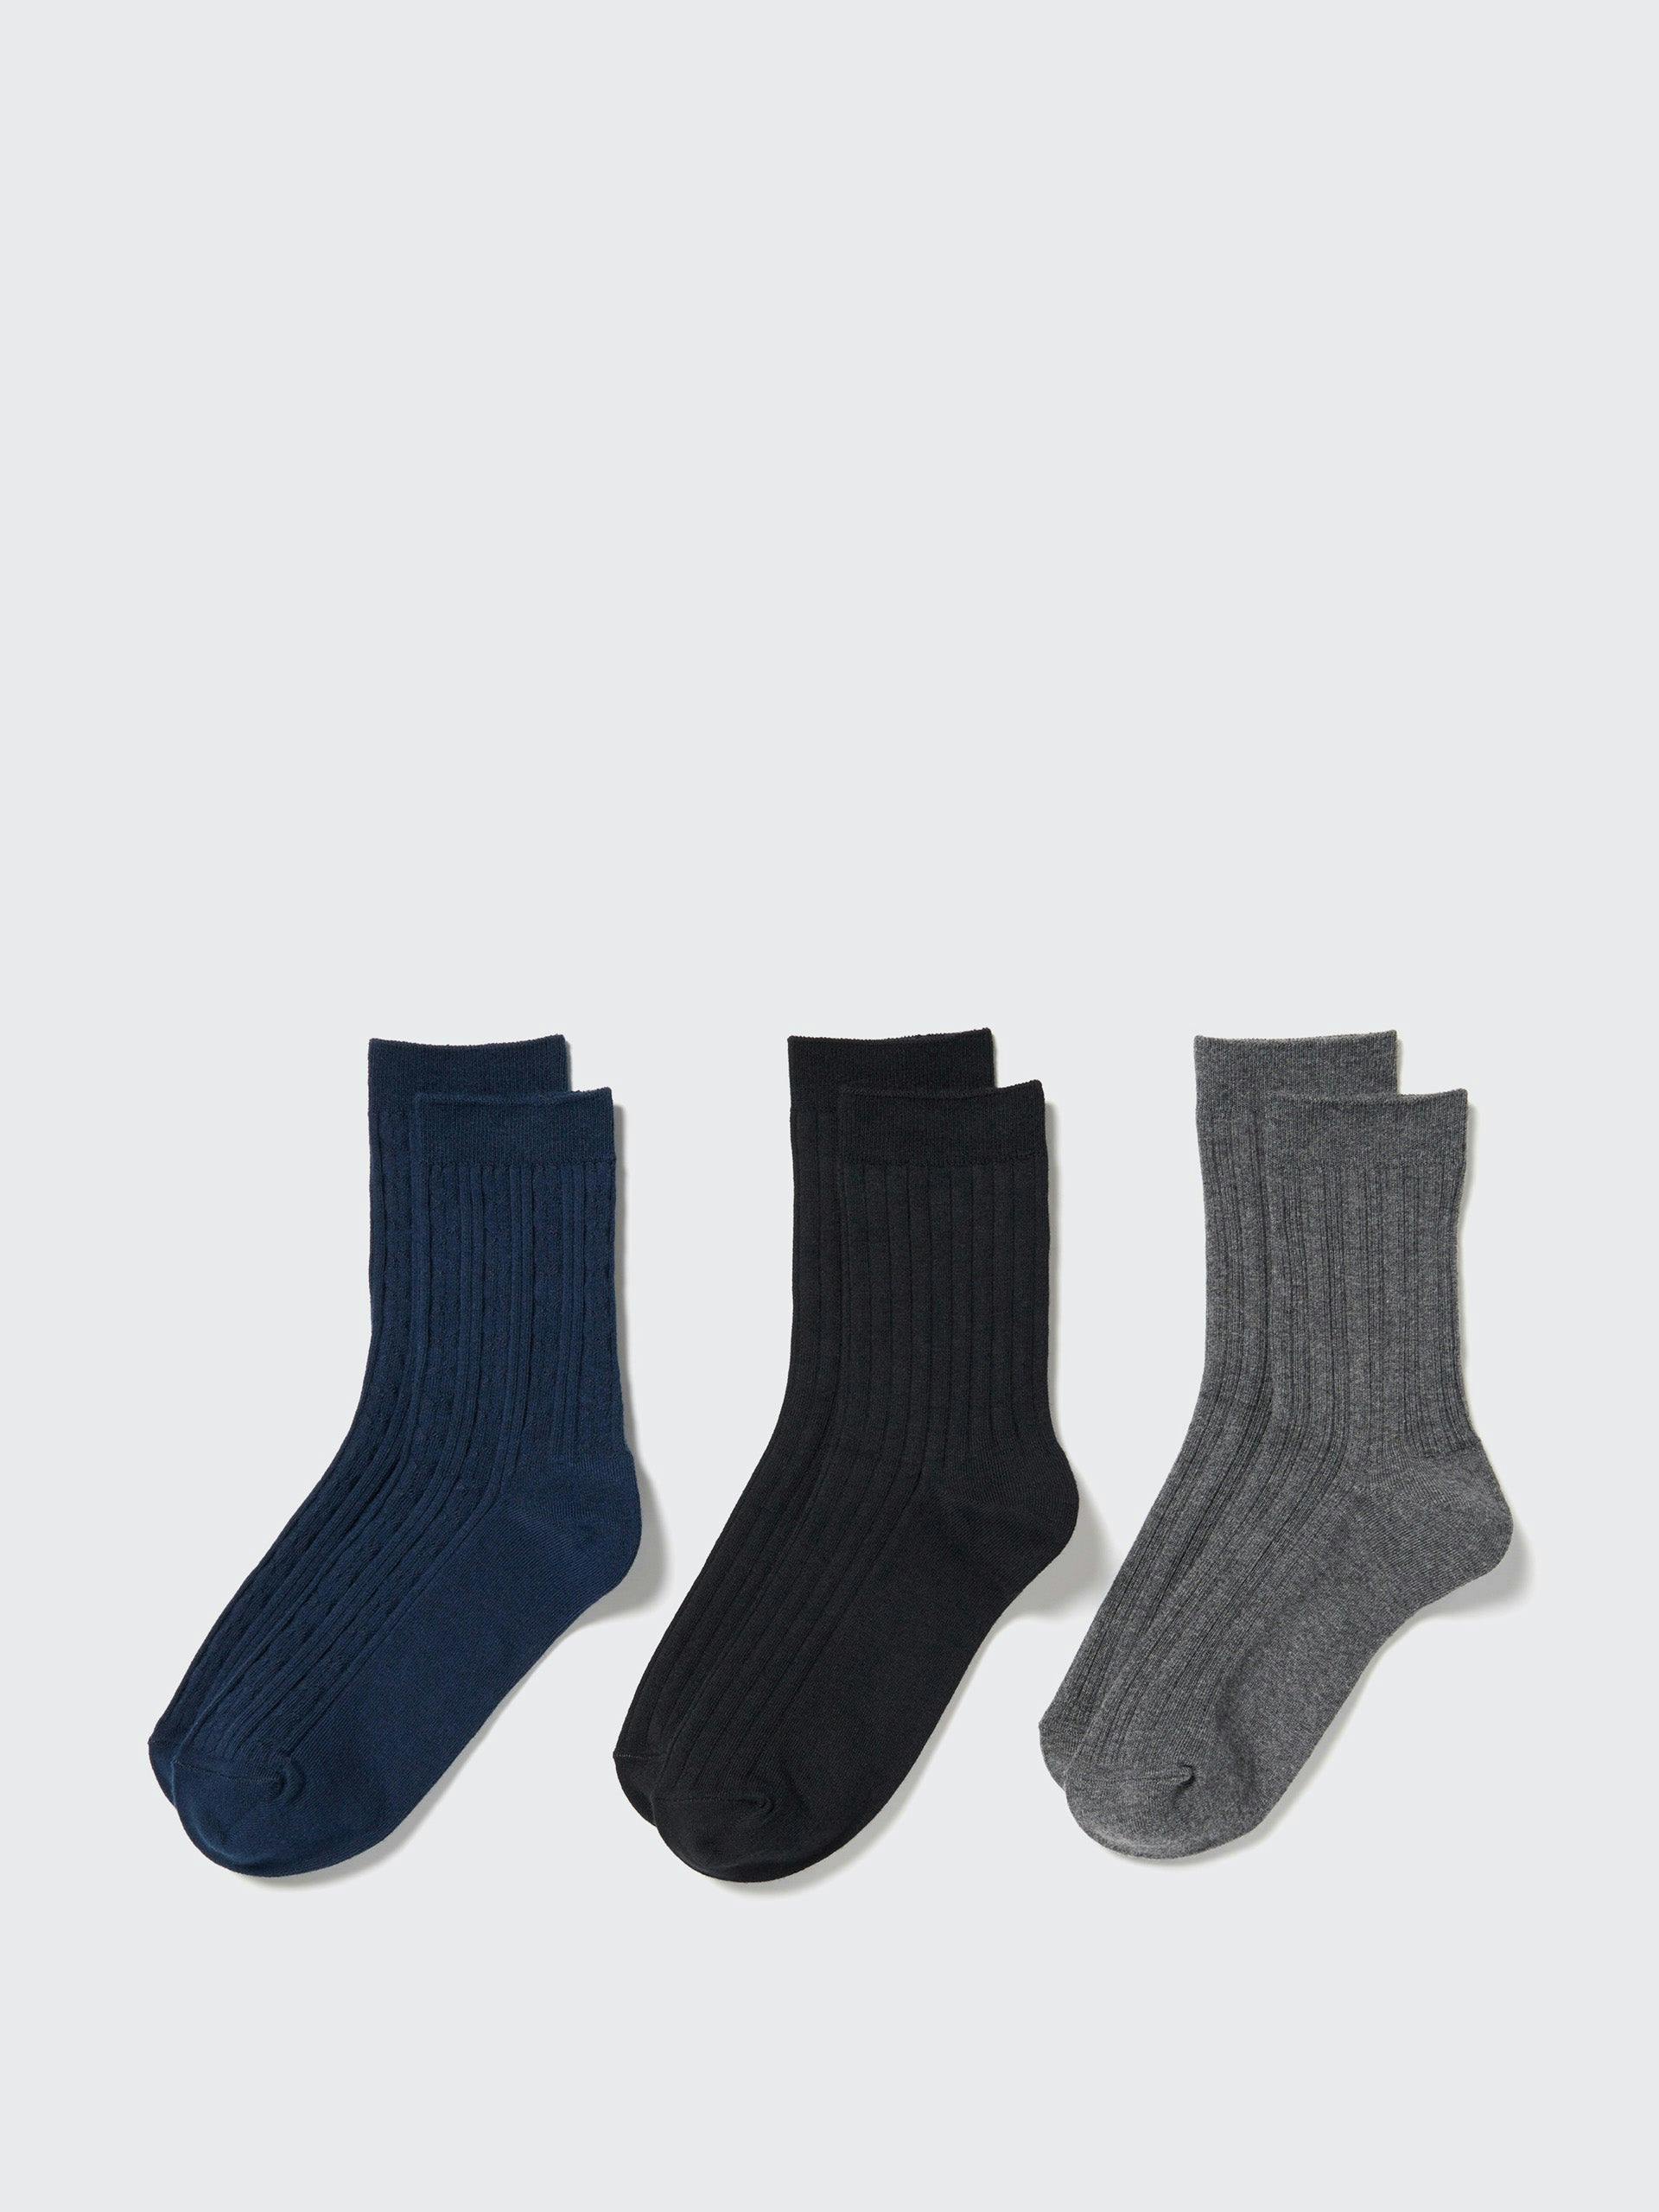 Cable knit socks (set of 3)